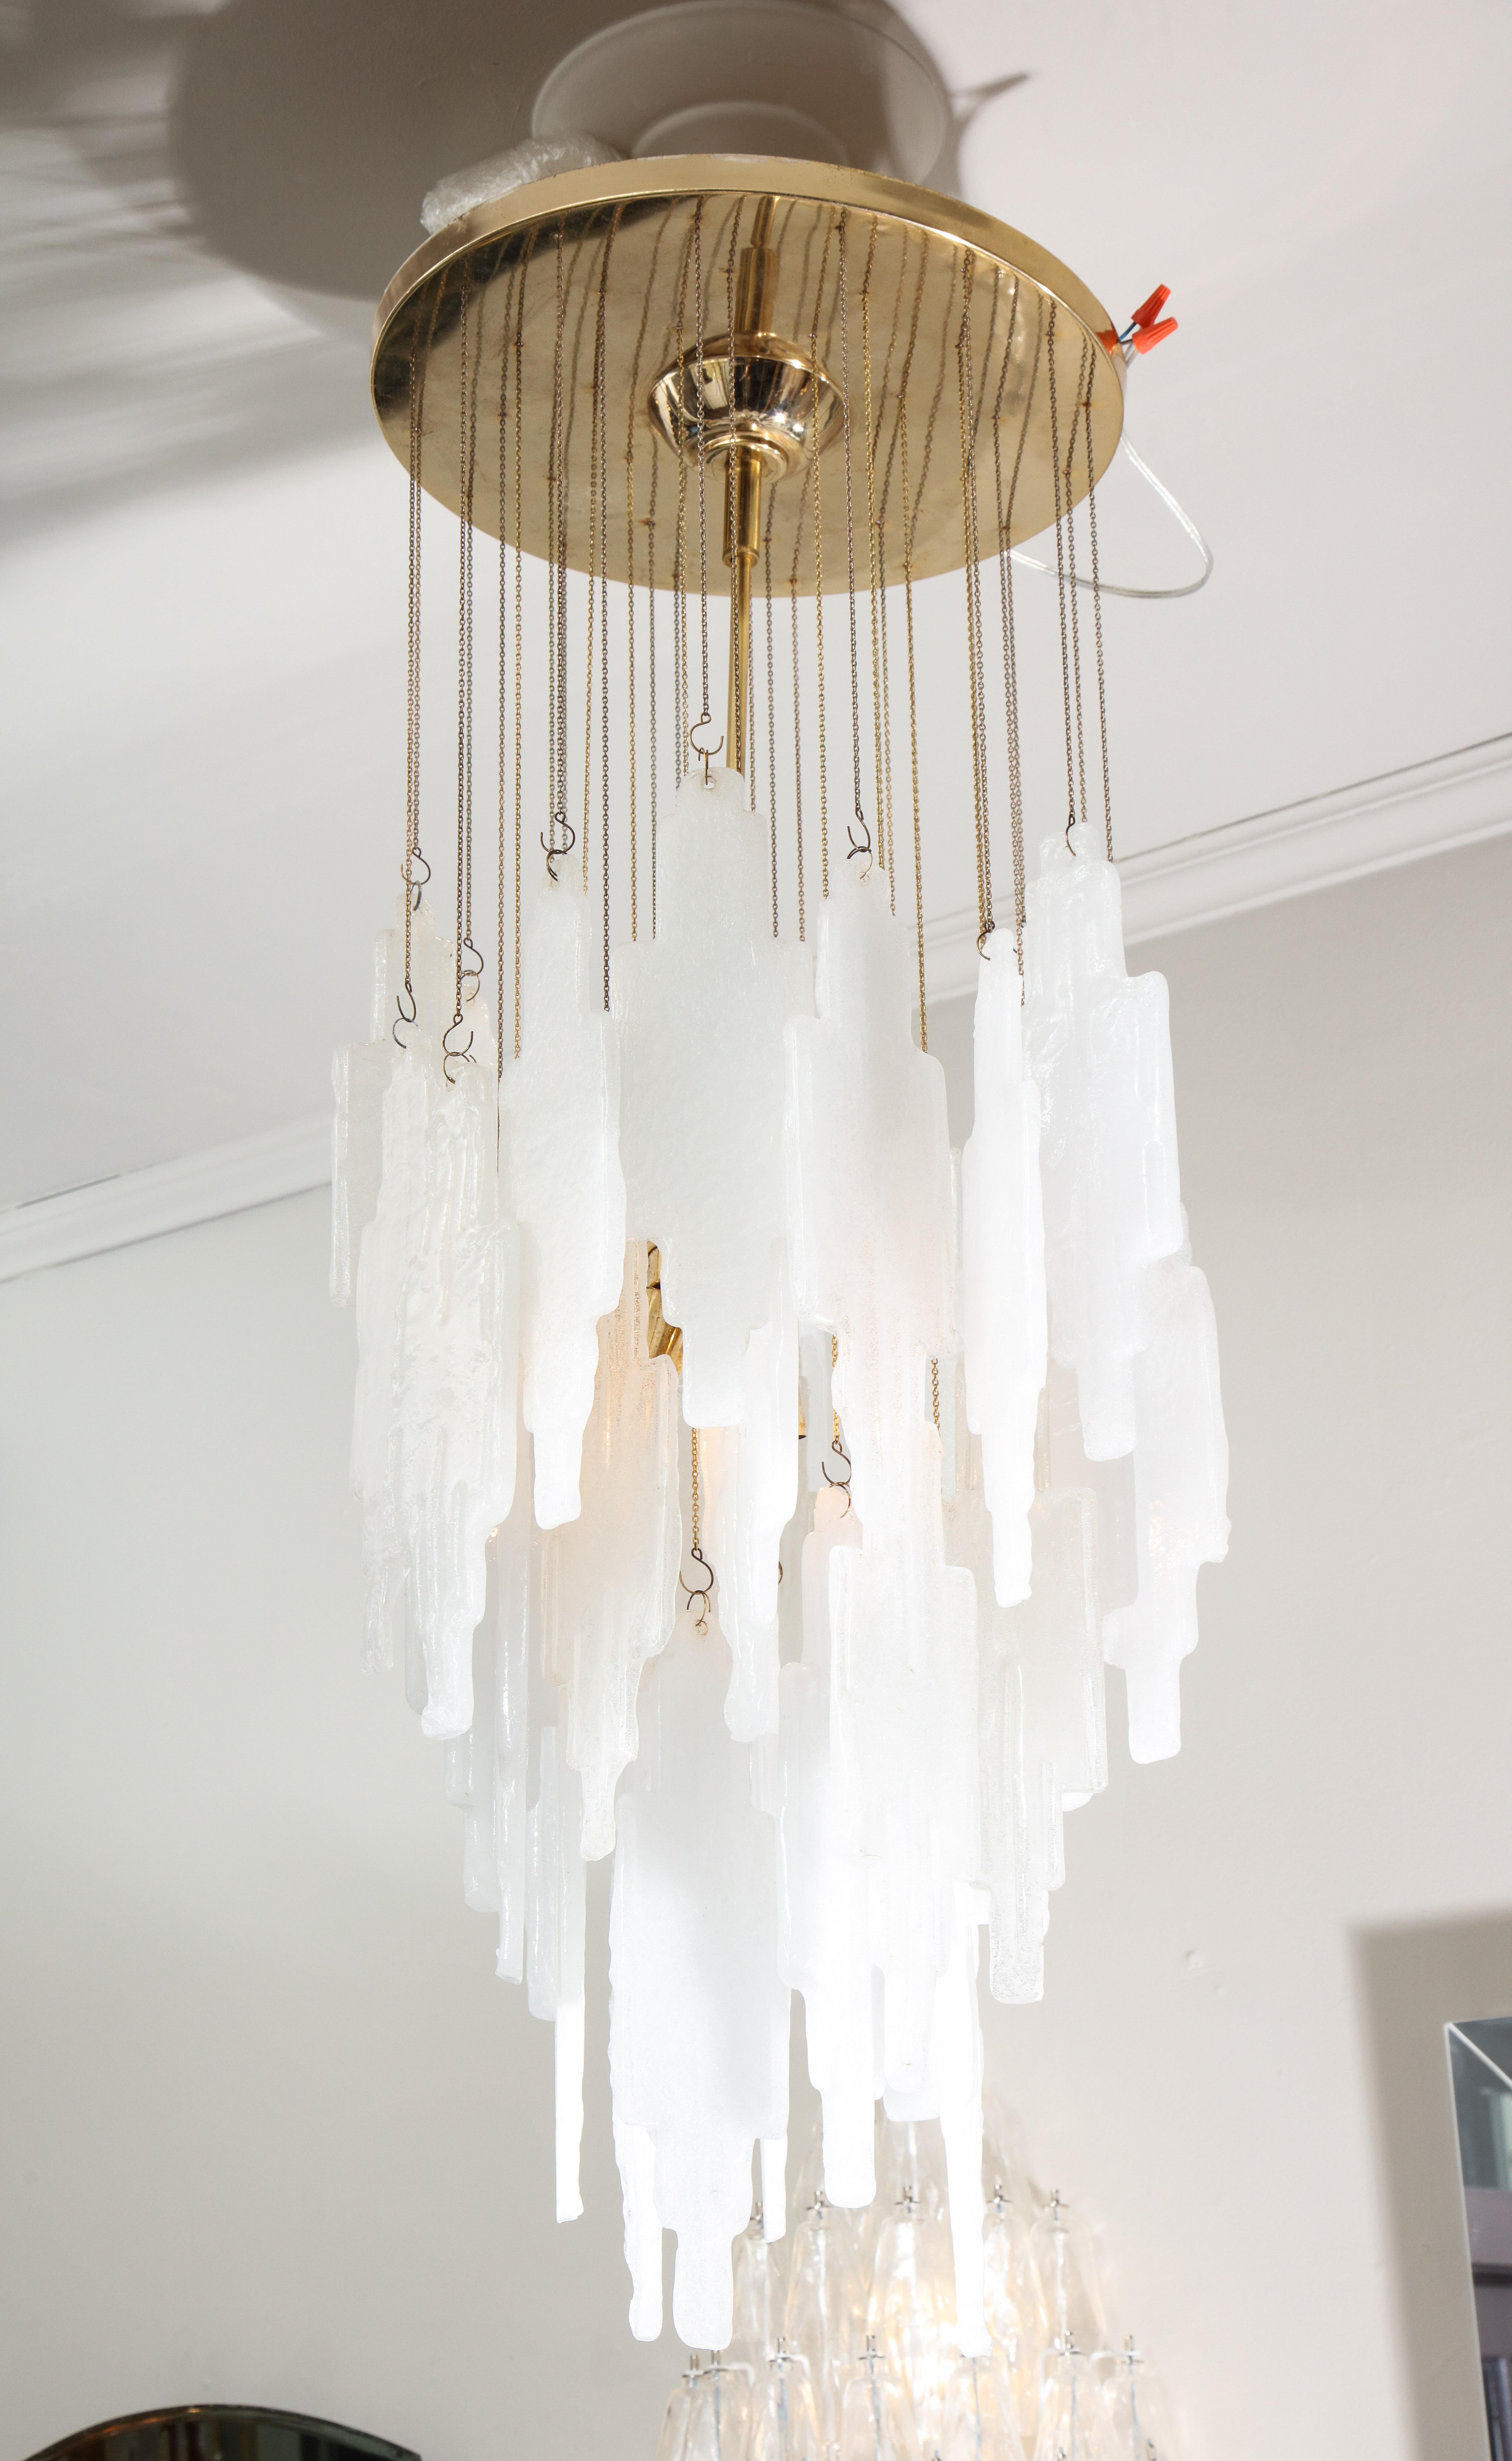 Unusual vintage lighting fixture with remarkable step-shaped crystal glass in clear and frosted color. Each glass is suspended elegantly by brass chain to create a beautiful cascading shape. The chandelier was designed and produced by Albano Poli